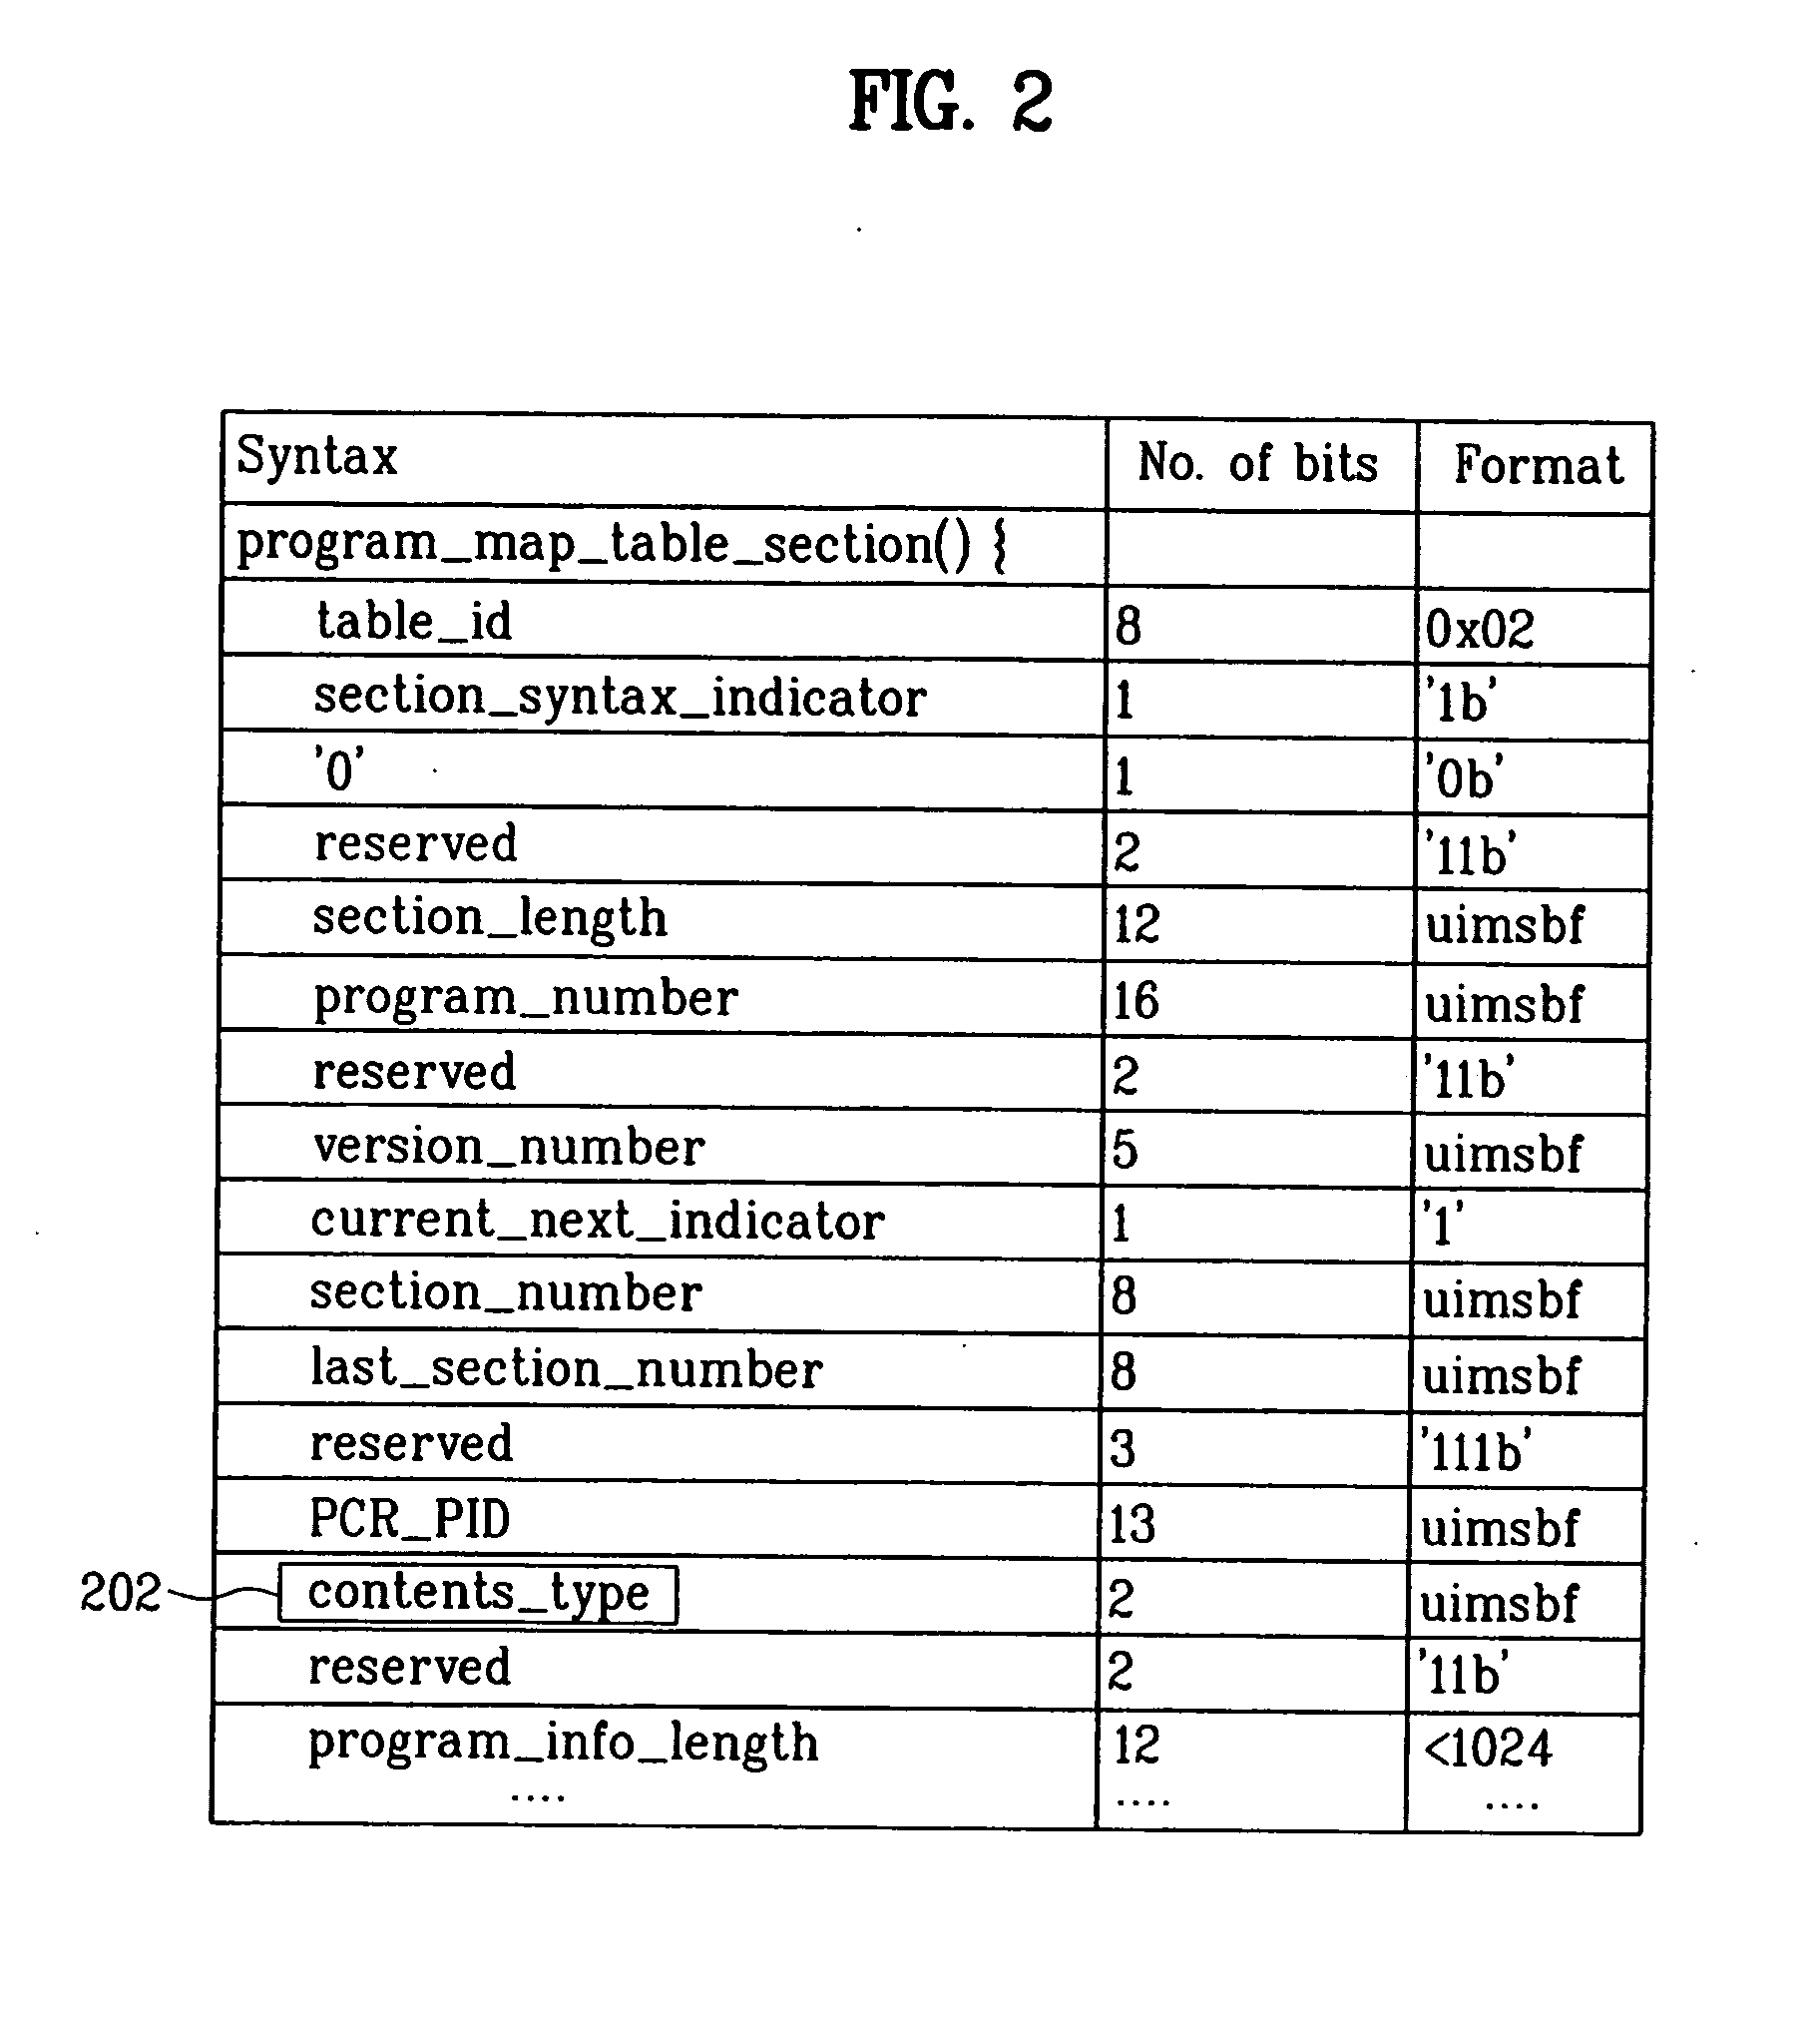 Digital television signal, method of processing a digital television signal in a transmitter and a receiver, and receiver